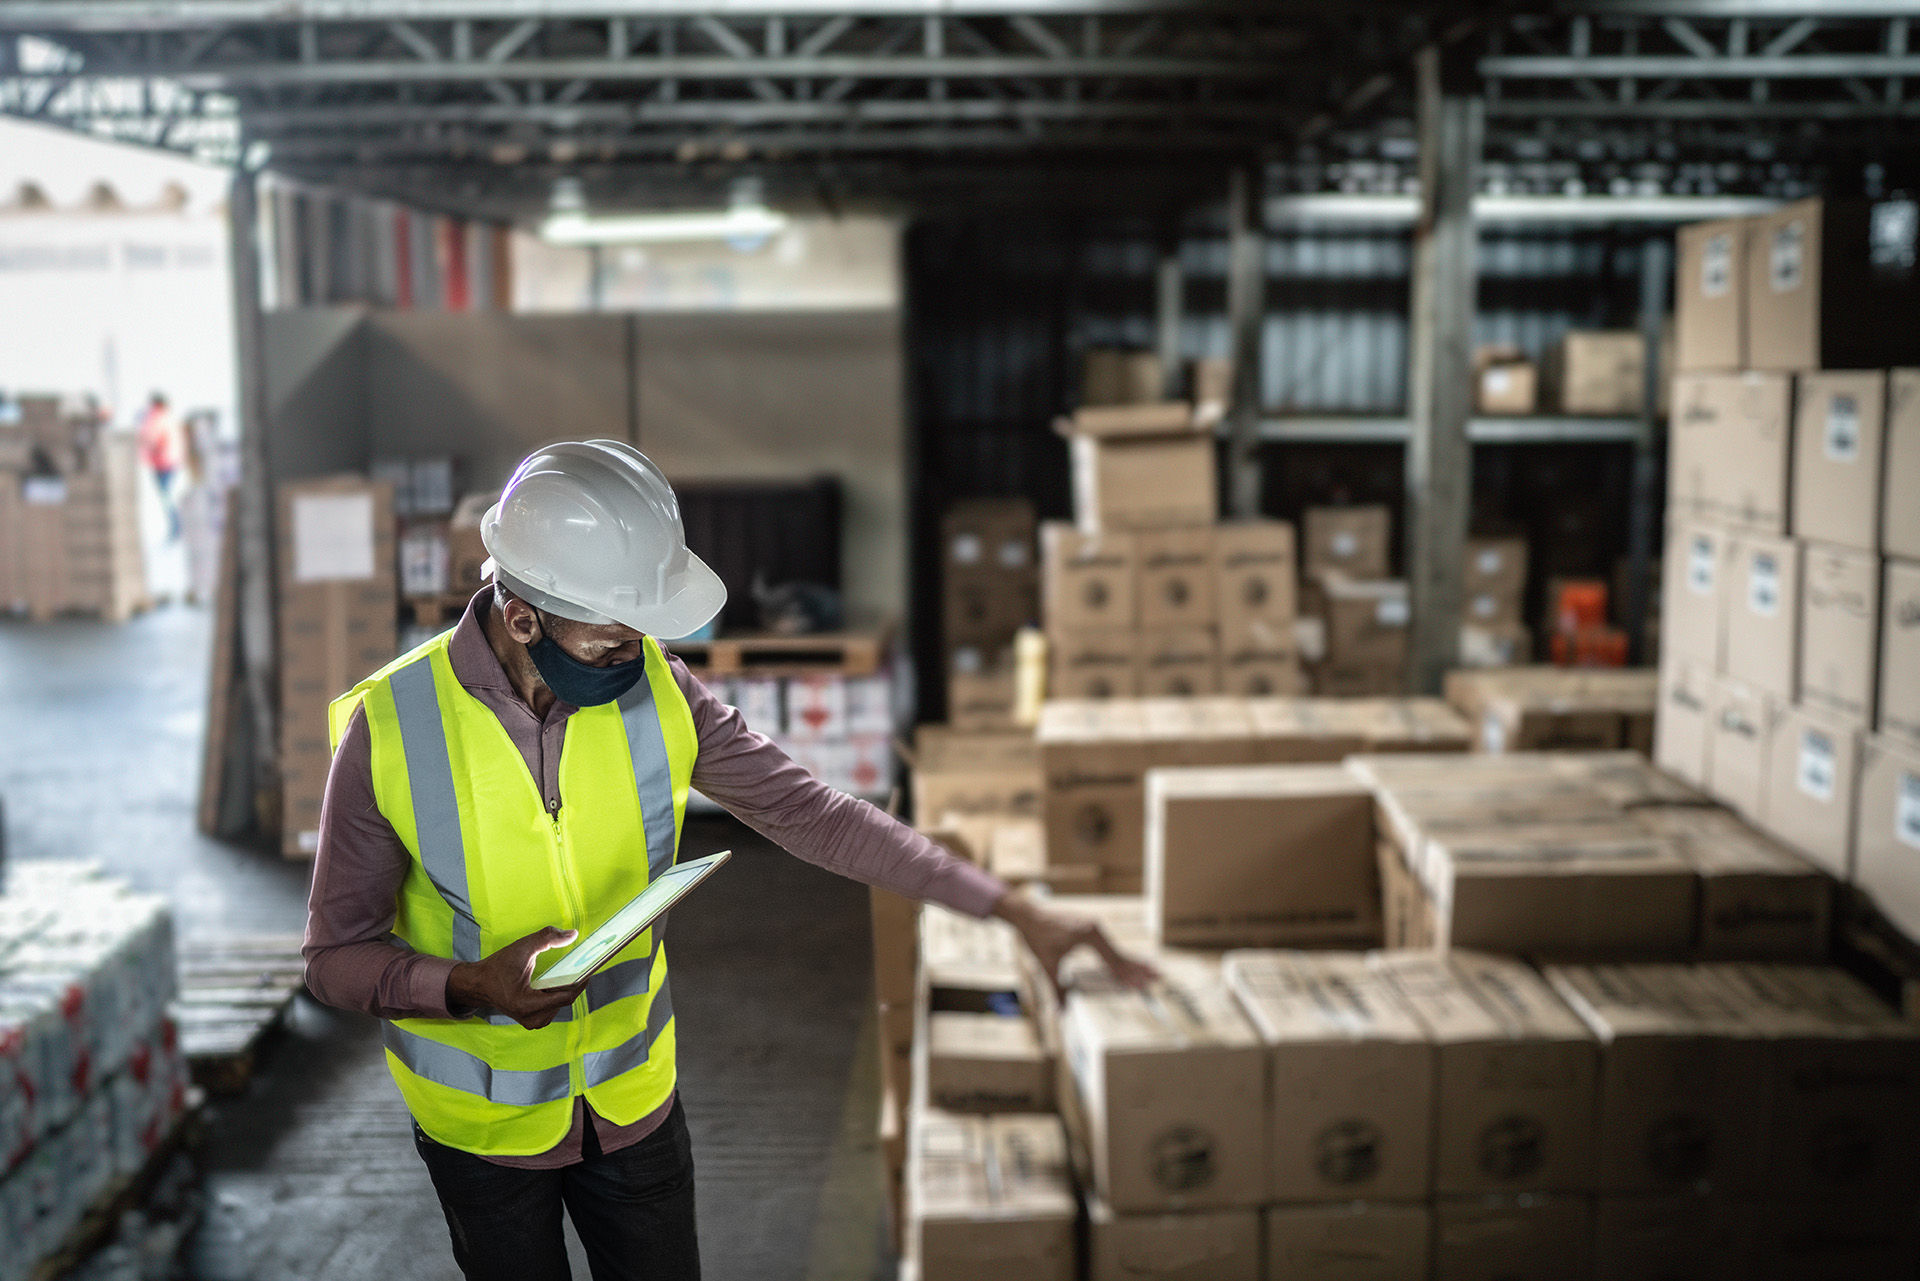 Man in hardhat working with boxes  in storage area